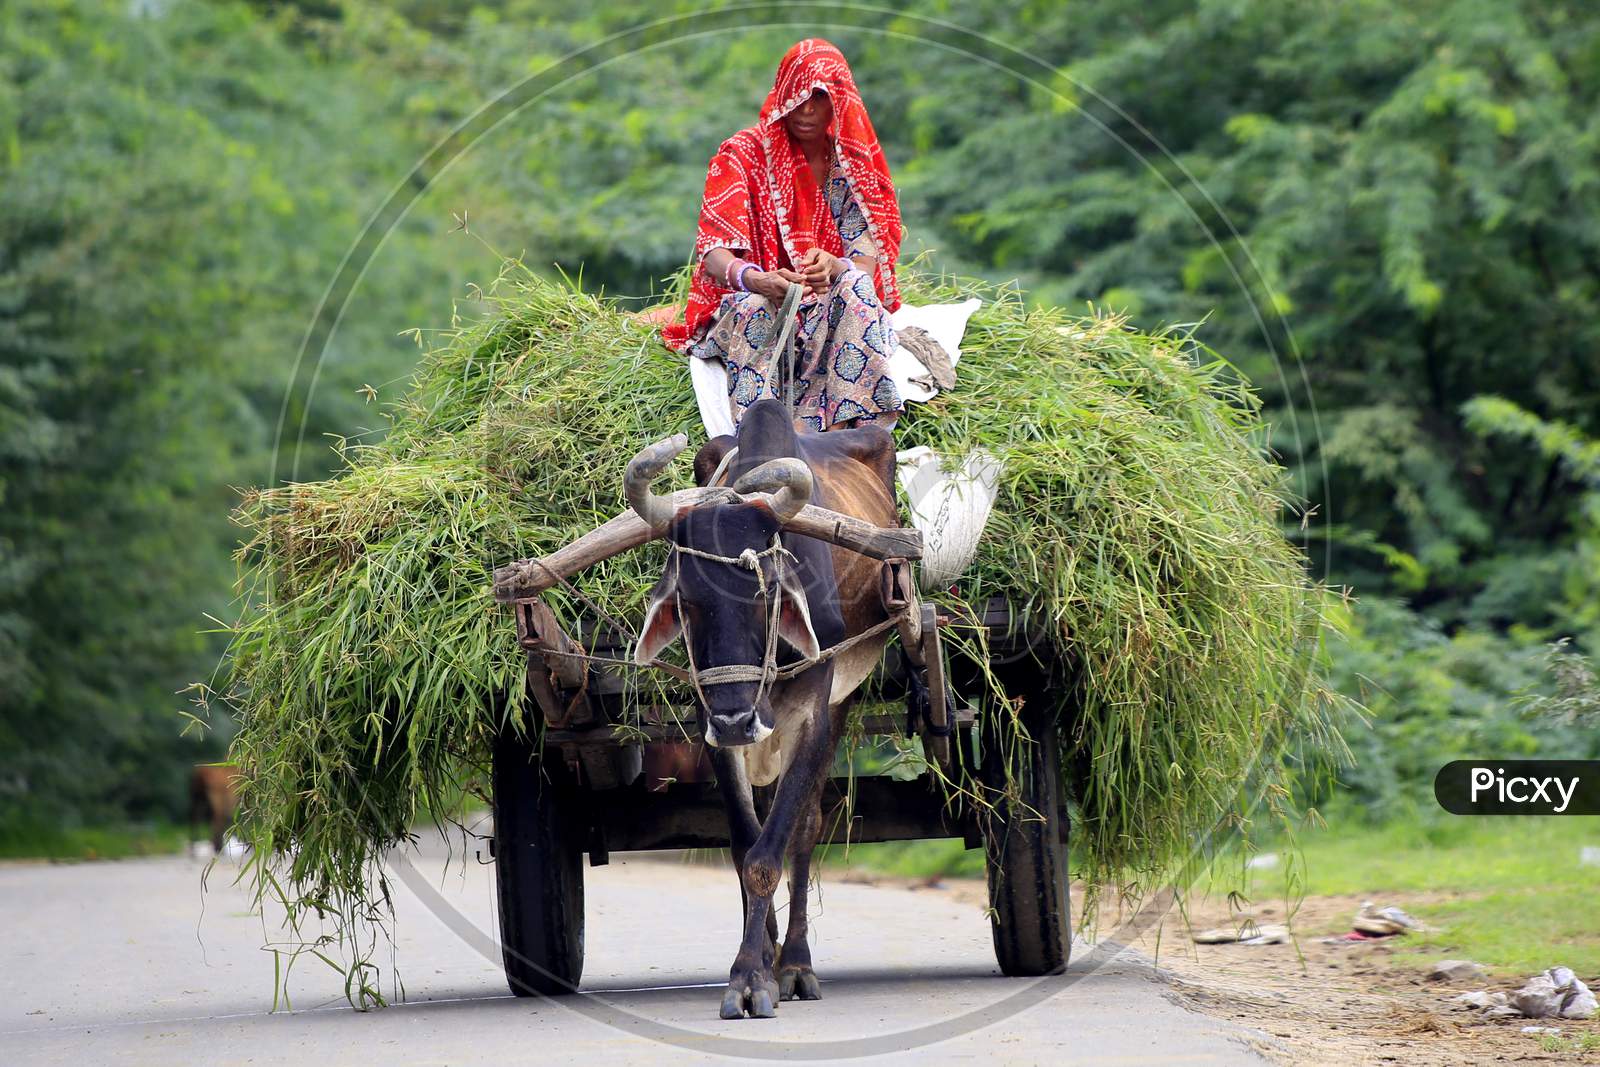 Indian Woman Returns From Agriculture Fields With Produce Carried On A Bullock Cart On The Outskirts Of Ajmer On August 21, 2020.